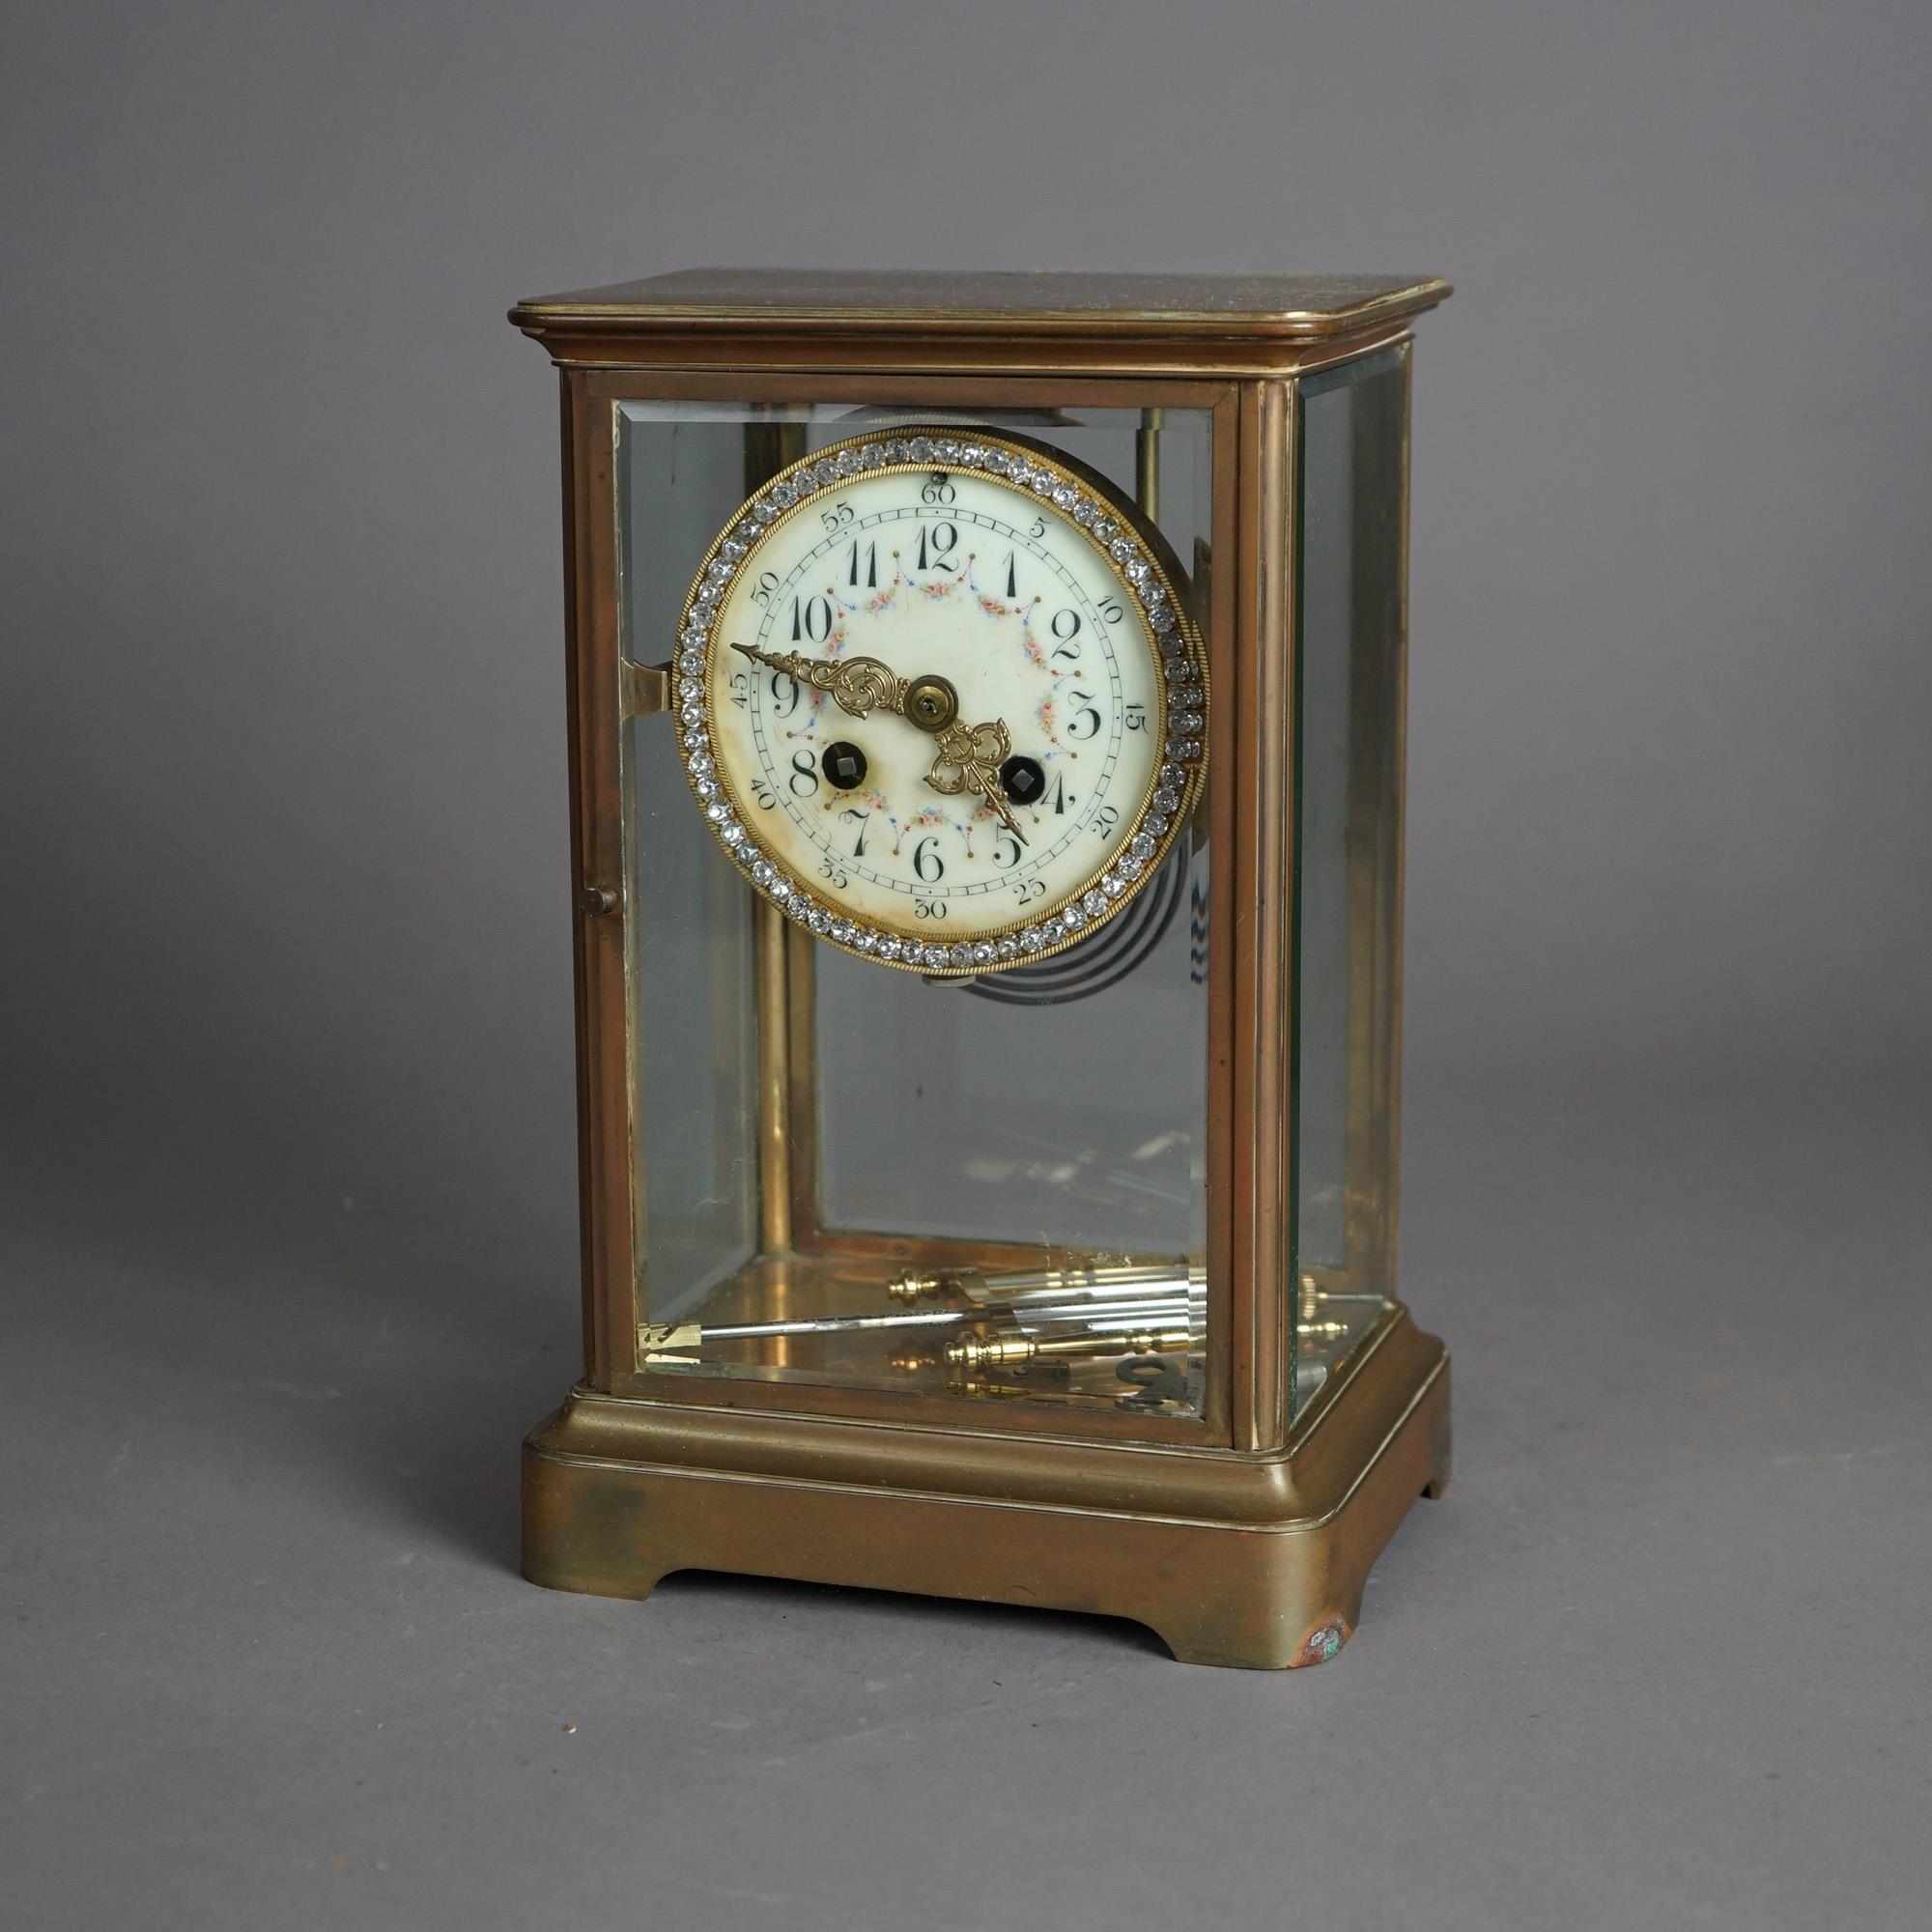 An antique crystal regulator clock in the manner of Tiffany & Co. offers porcelain face, with jeweled trimming and identifying stamp en verso as photographed, 19th century

Measures- 10.75''H x 7''W x 5.5''D